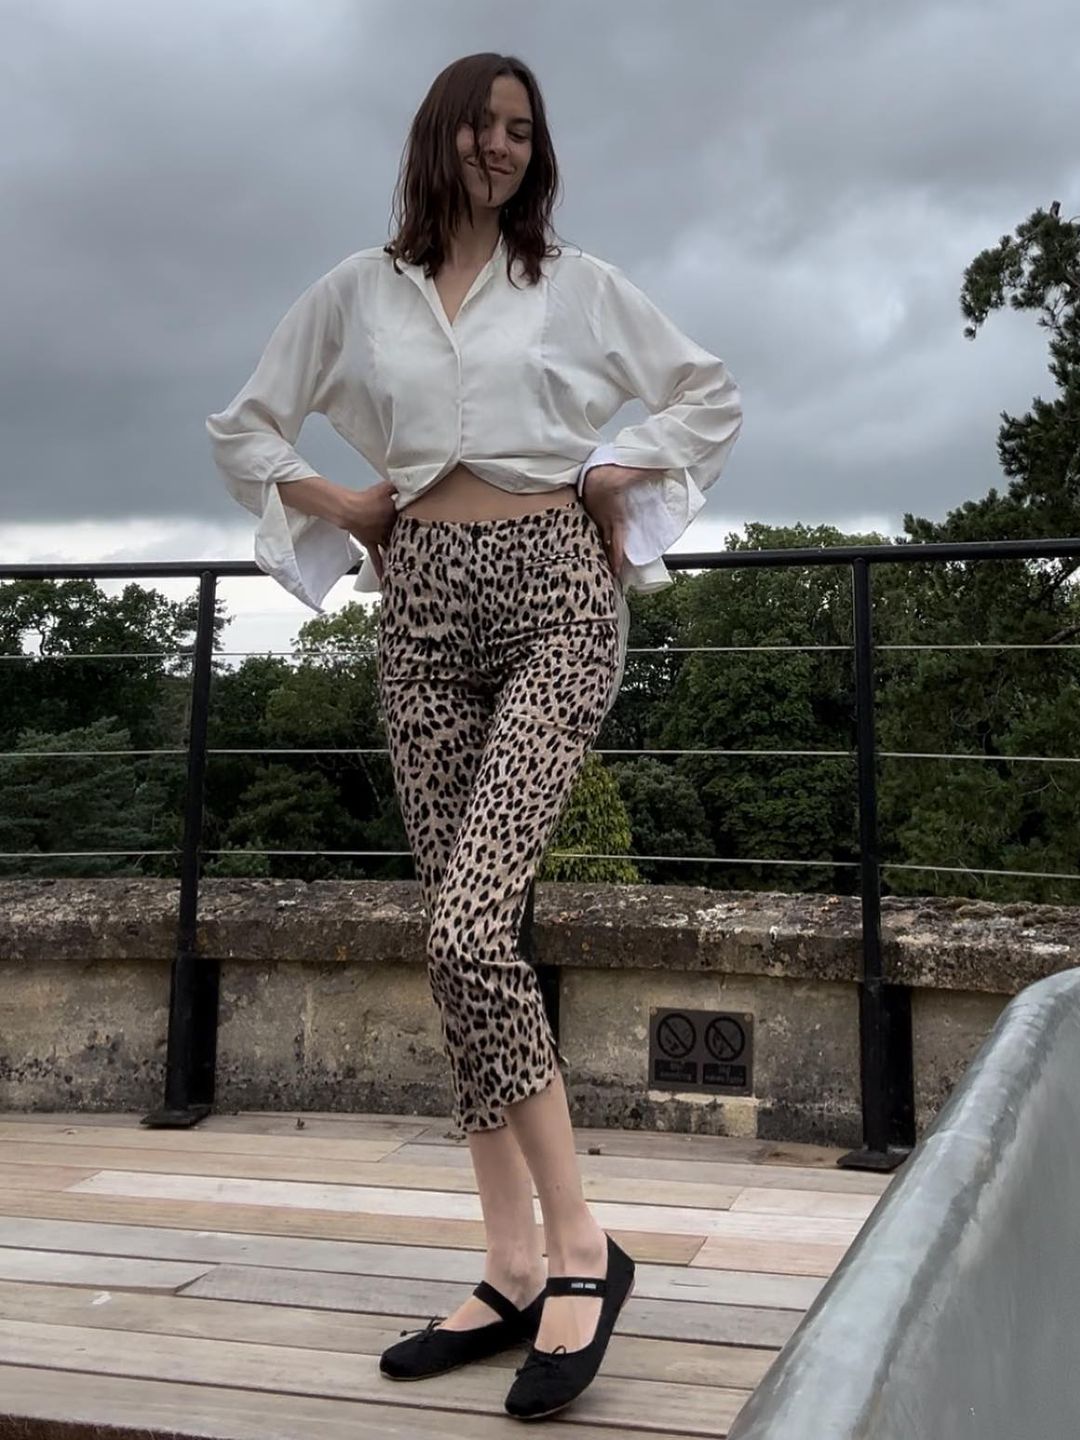 Alexa Chung poses in leopard print pants and a white blouse